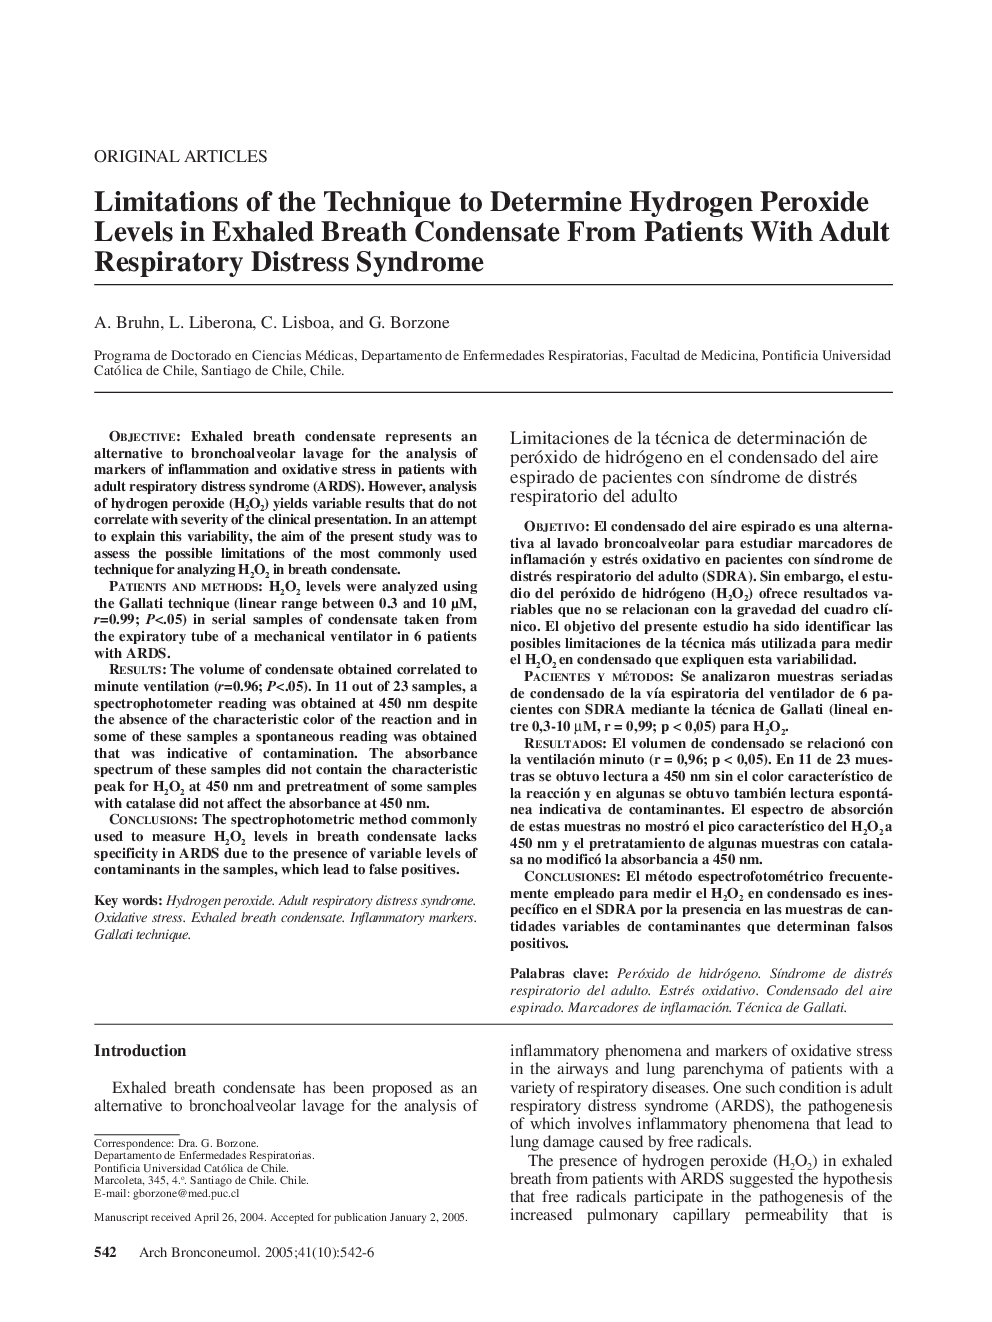 Limitations of the Technique to Determine Hydrogen Peroxide Levels in Exhaled Breath Condensate From Patients With Adult Respiratory Distress Syndrome